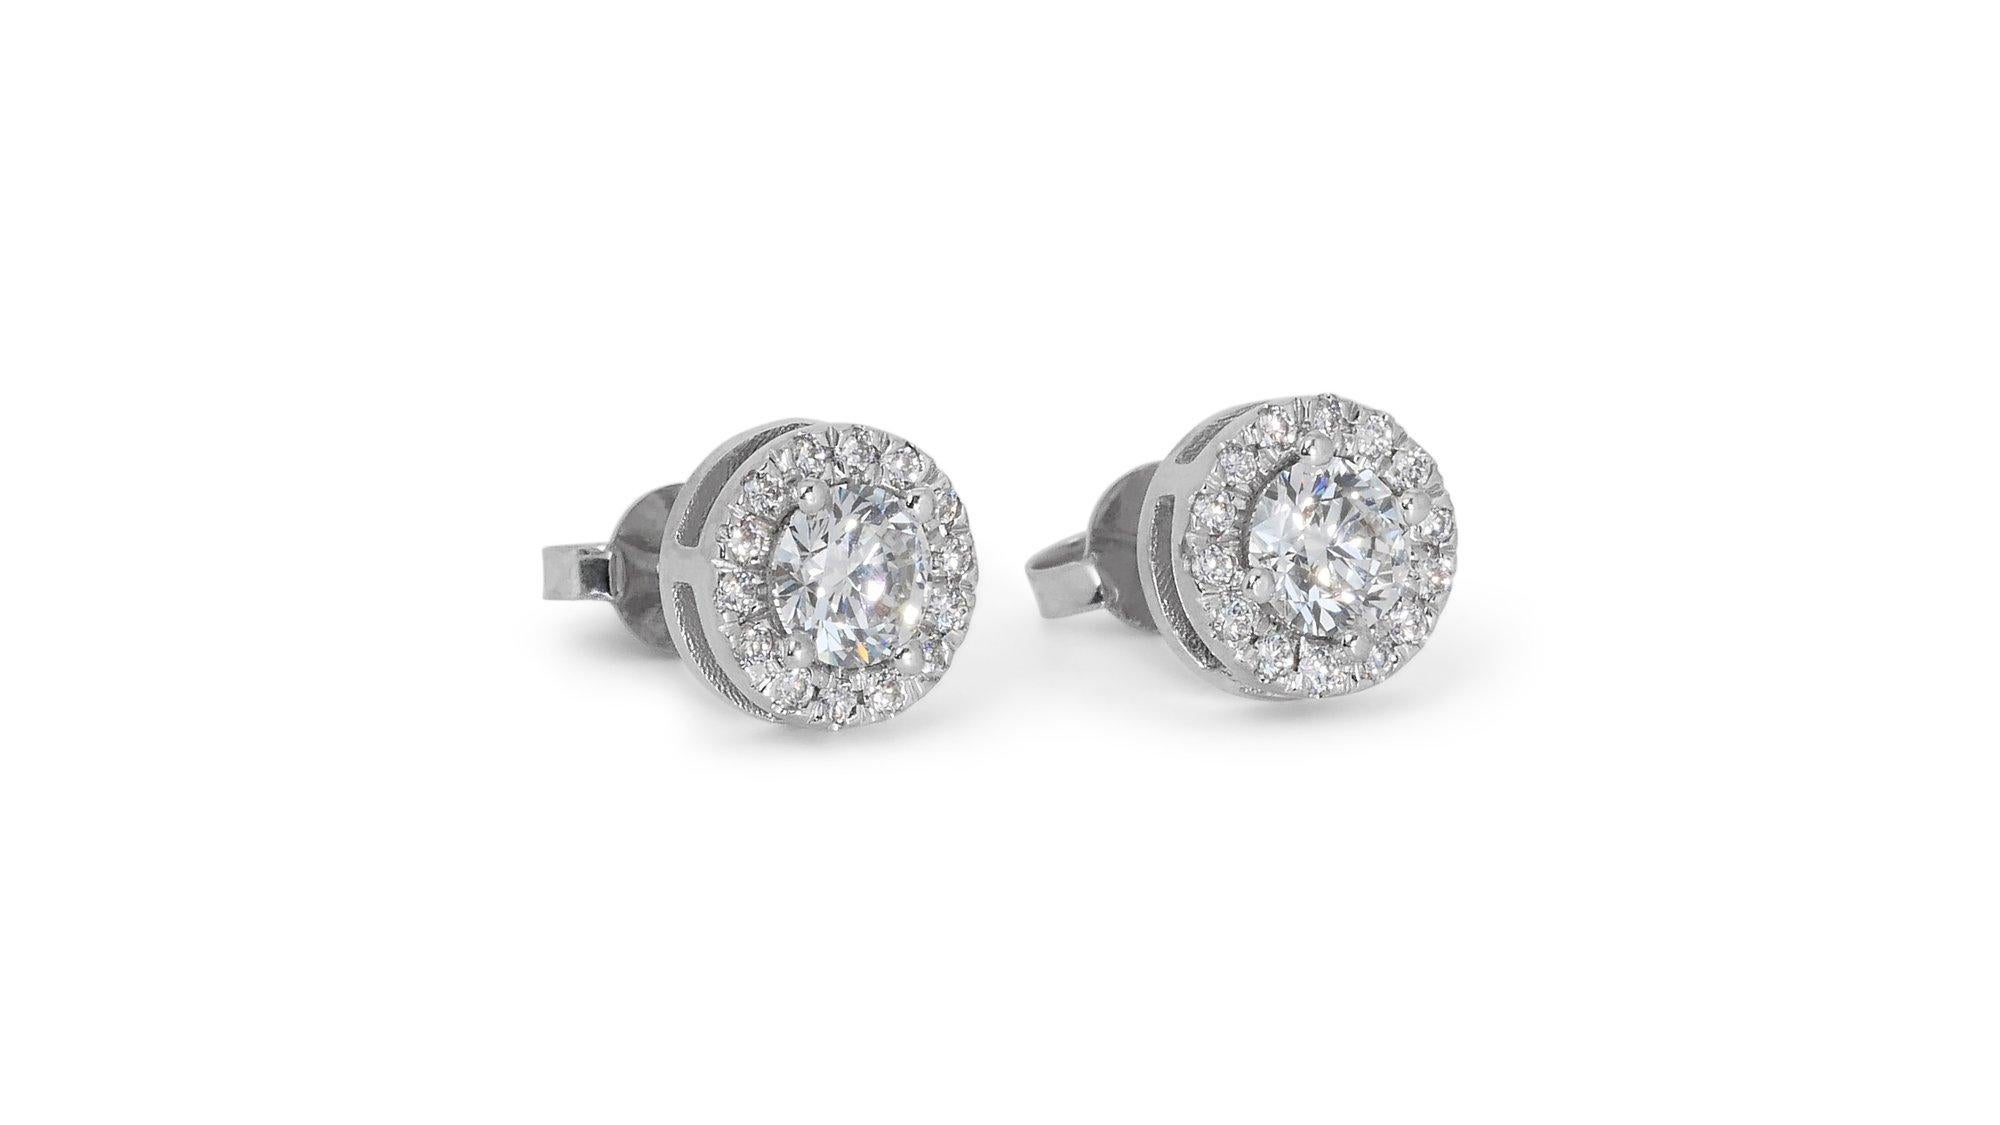 Brilliant Cut Dazzling 1.65ct Diamond Halo Stud Earrings in 18k White Gold - GIA Certified For Sale